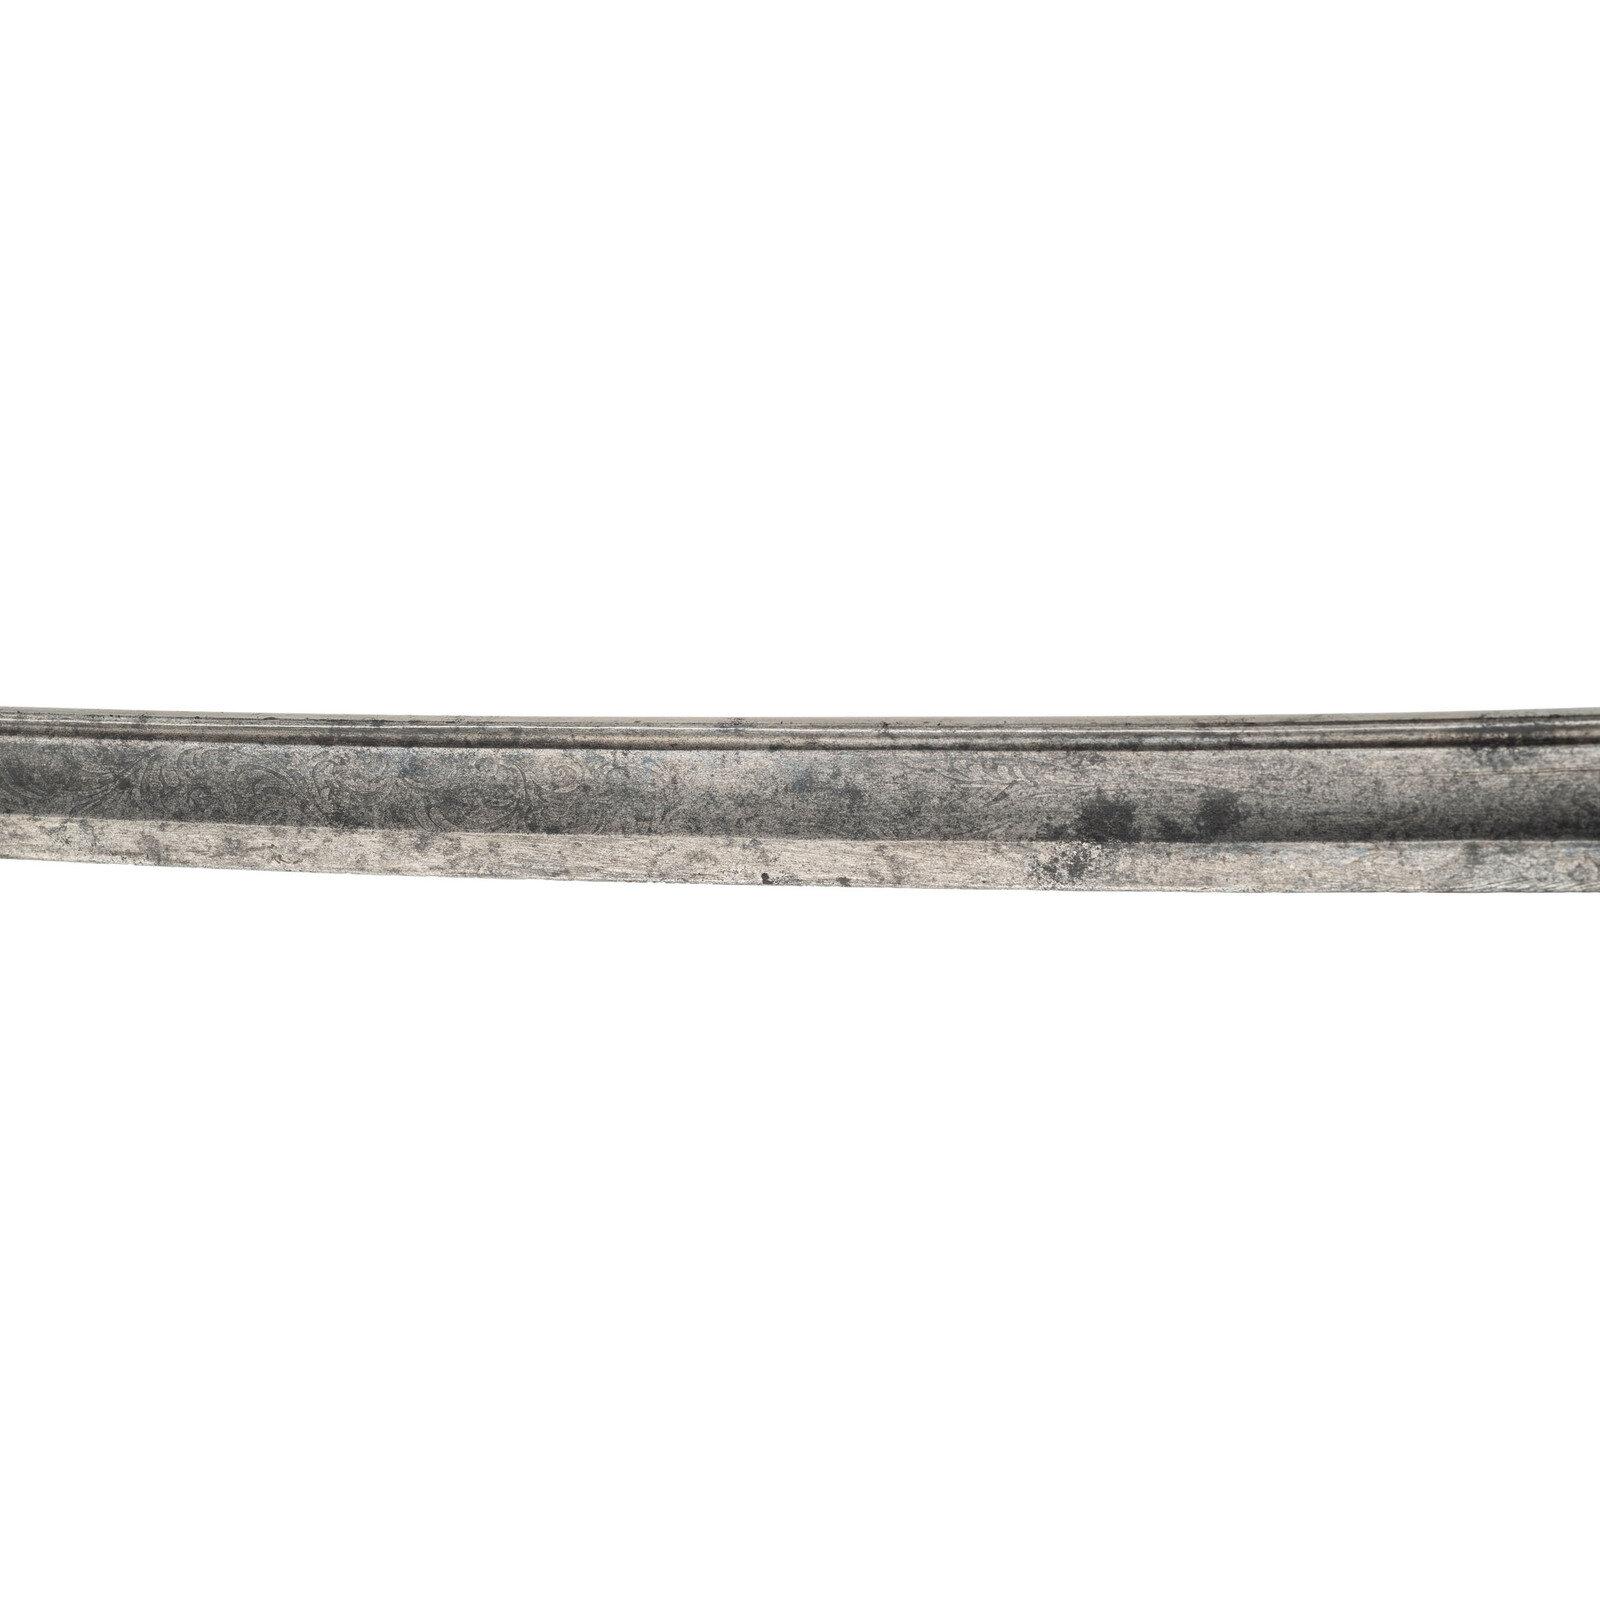 German Silver Gripped Officers Sword Inscribed to Isaiah Conley - 101st PA - POW and Prison Escapee